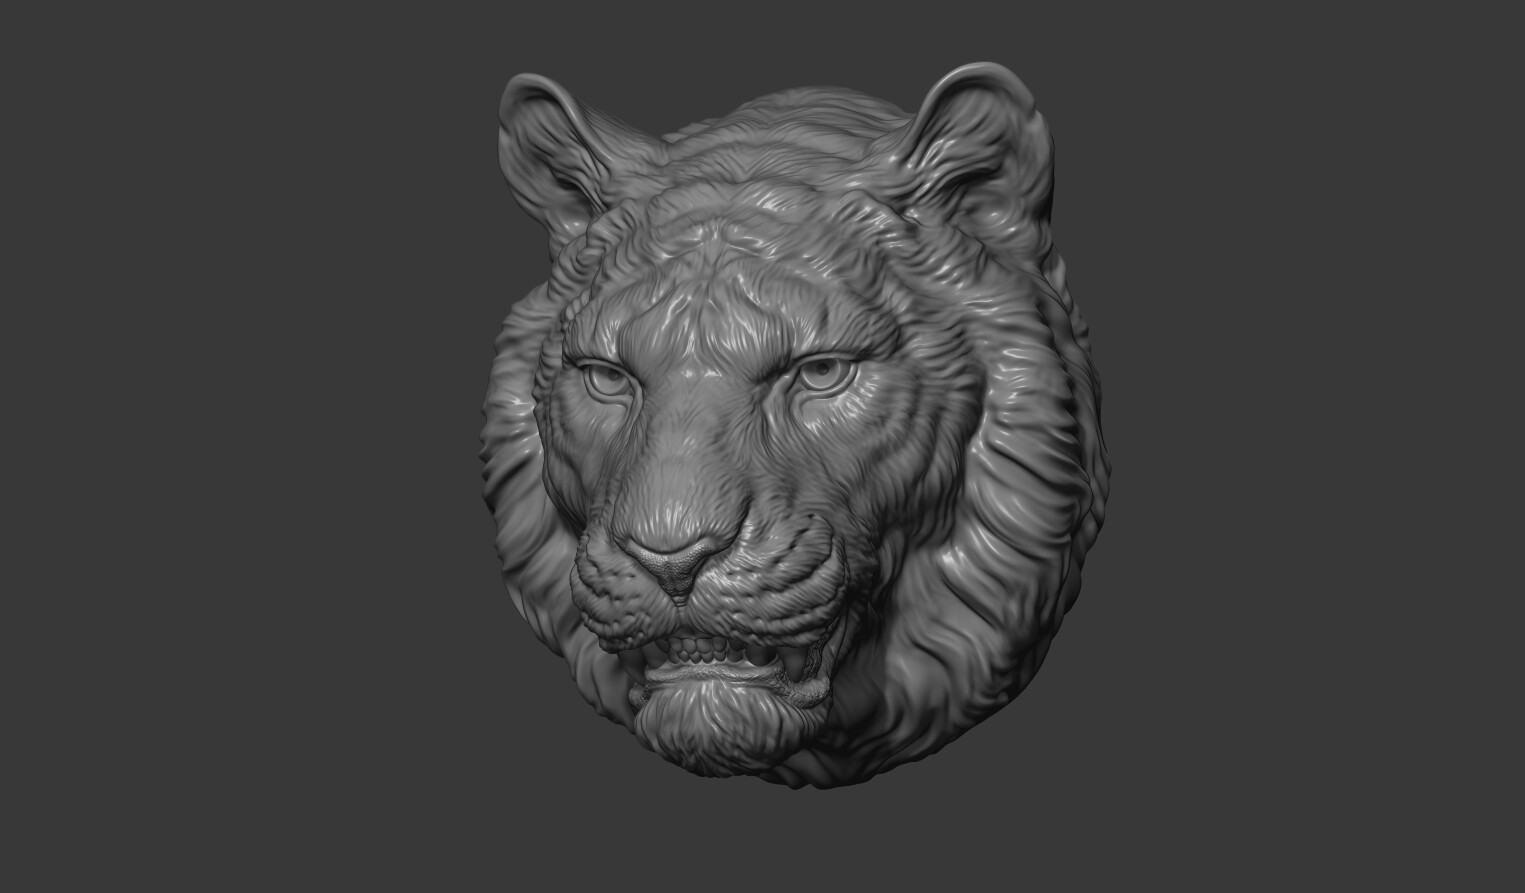 ArtStation - Tiger toothy | Resources